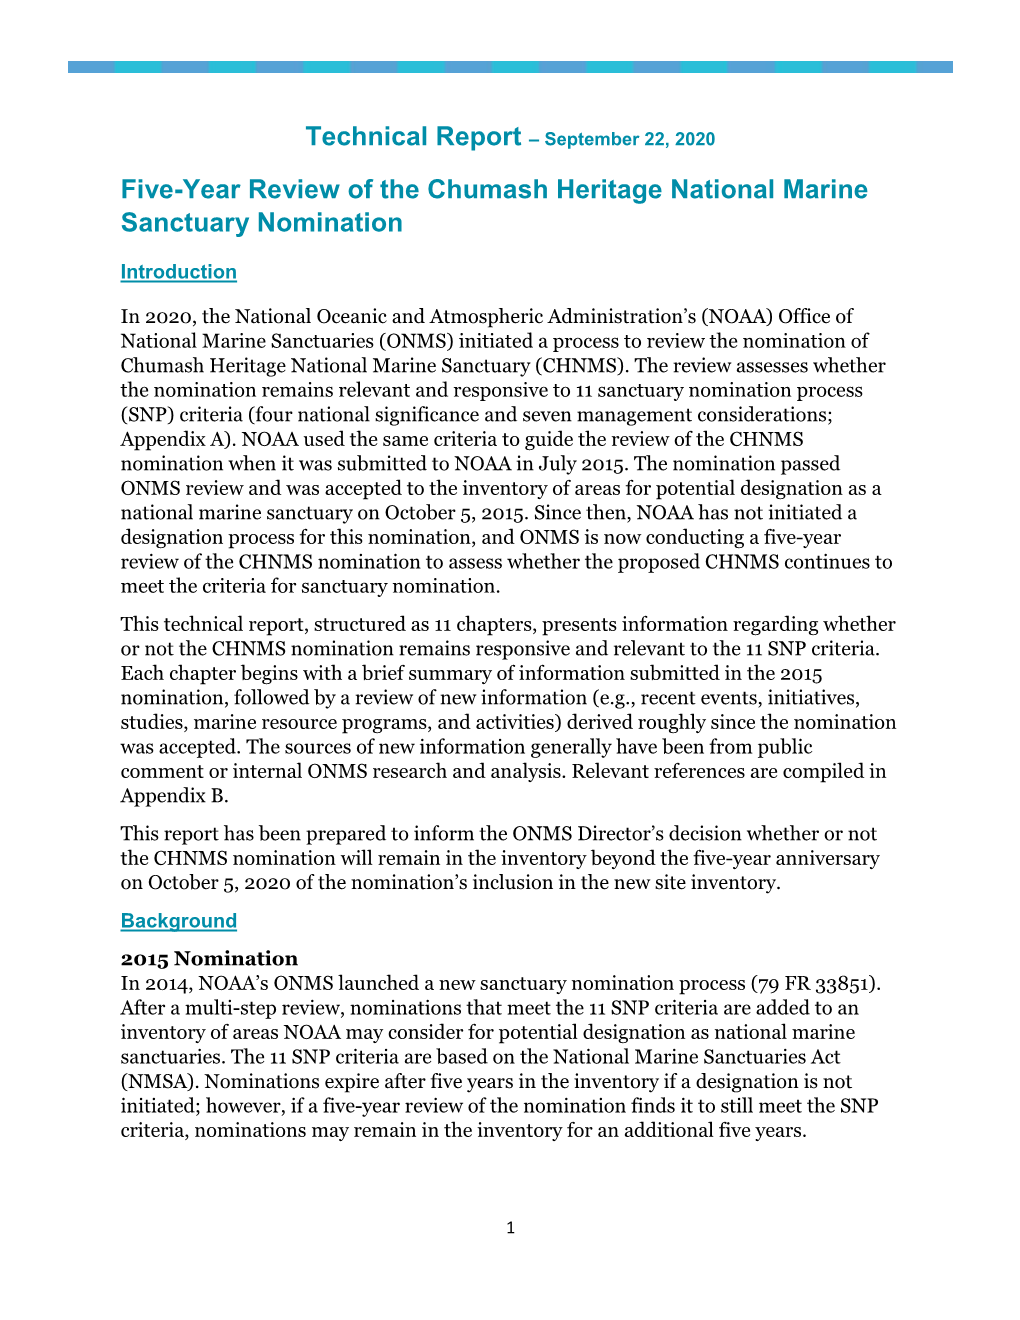 Five-Year Review of the Chumash Heritage National Marine Sanctuary Nomination